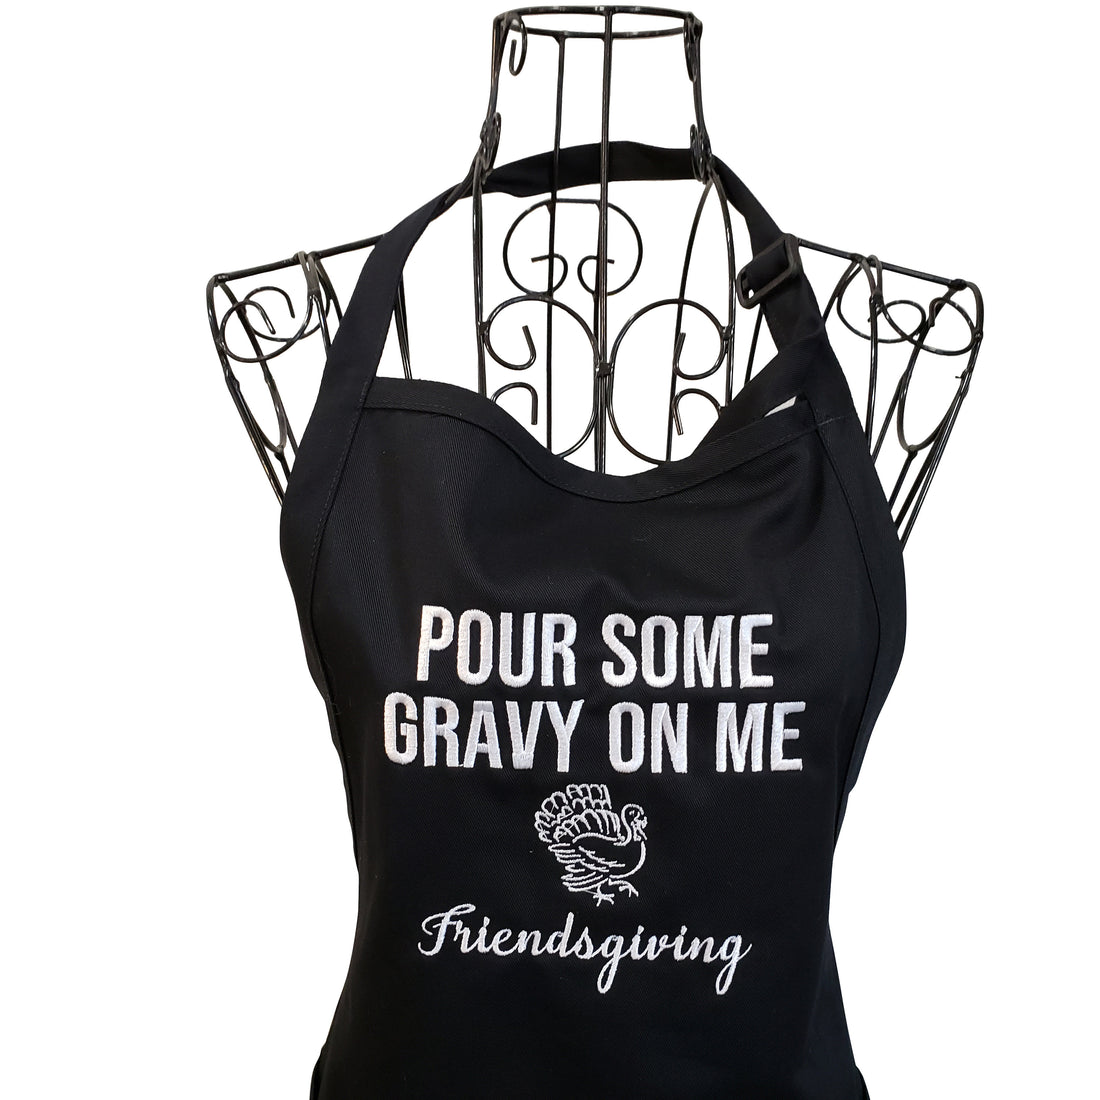 Pour Some Gravy on Me Friendsgiving Embroidered Apron for Women